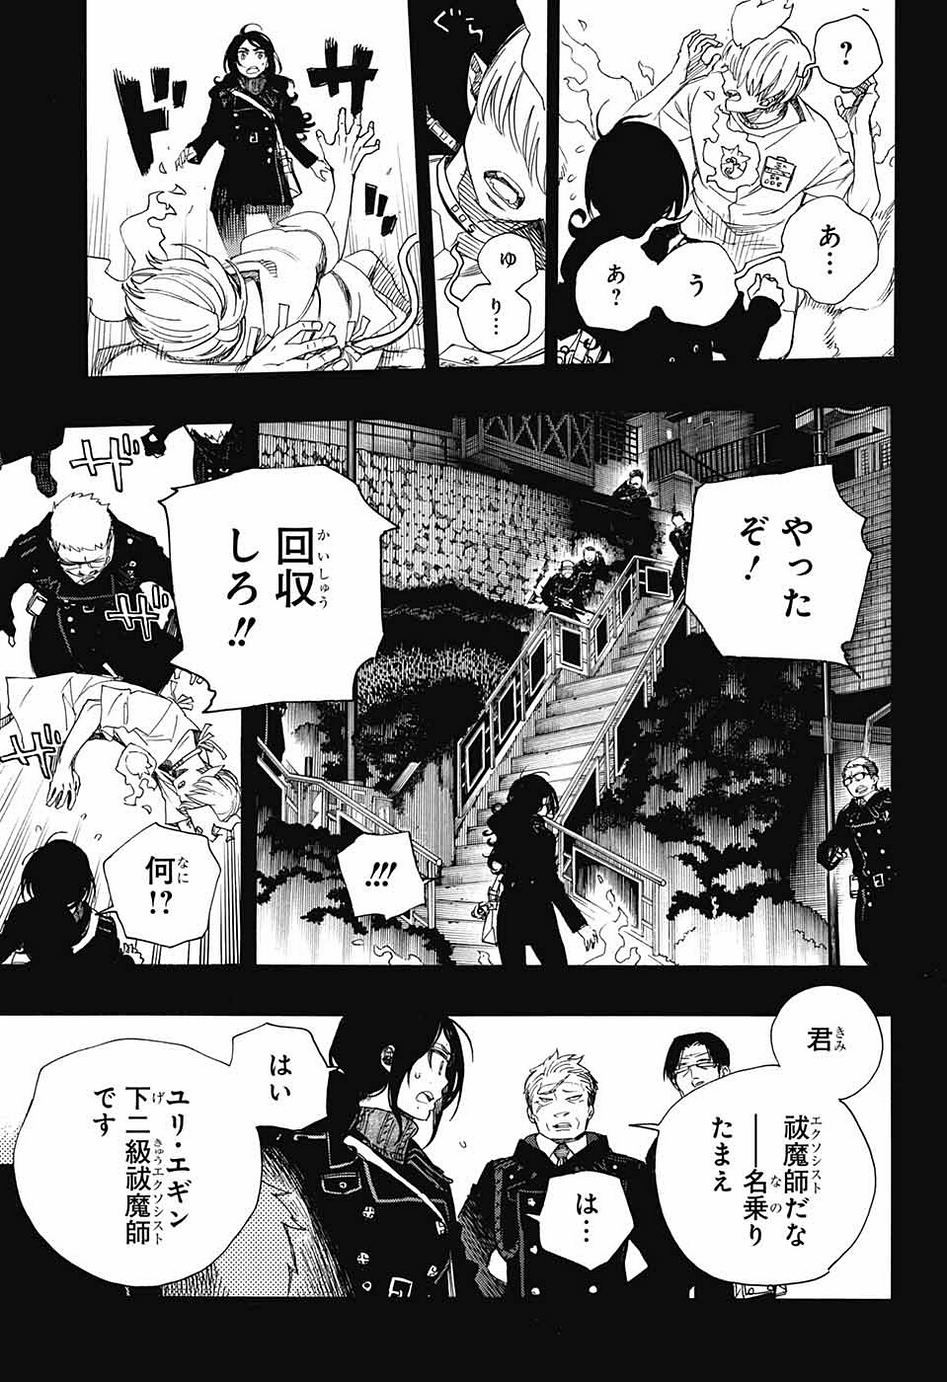 Ao no Exorcist - Chapter 105 - Page 4